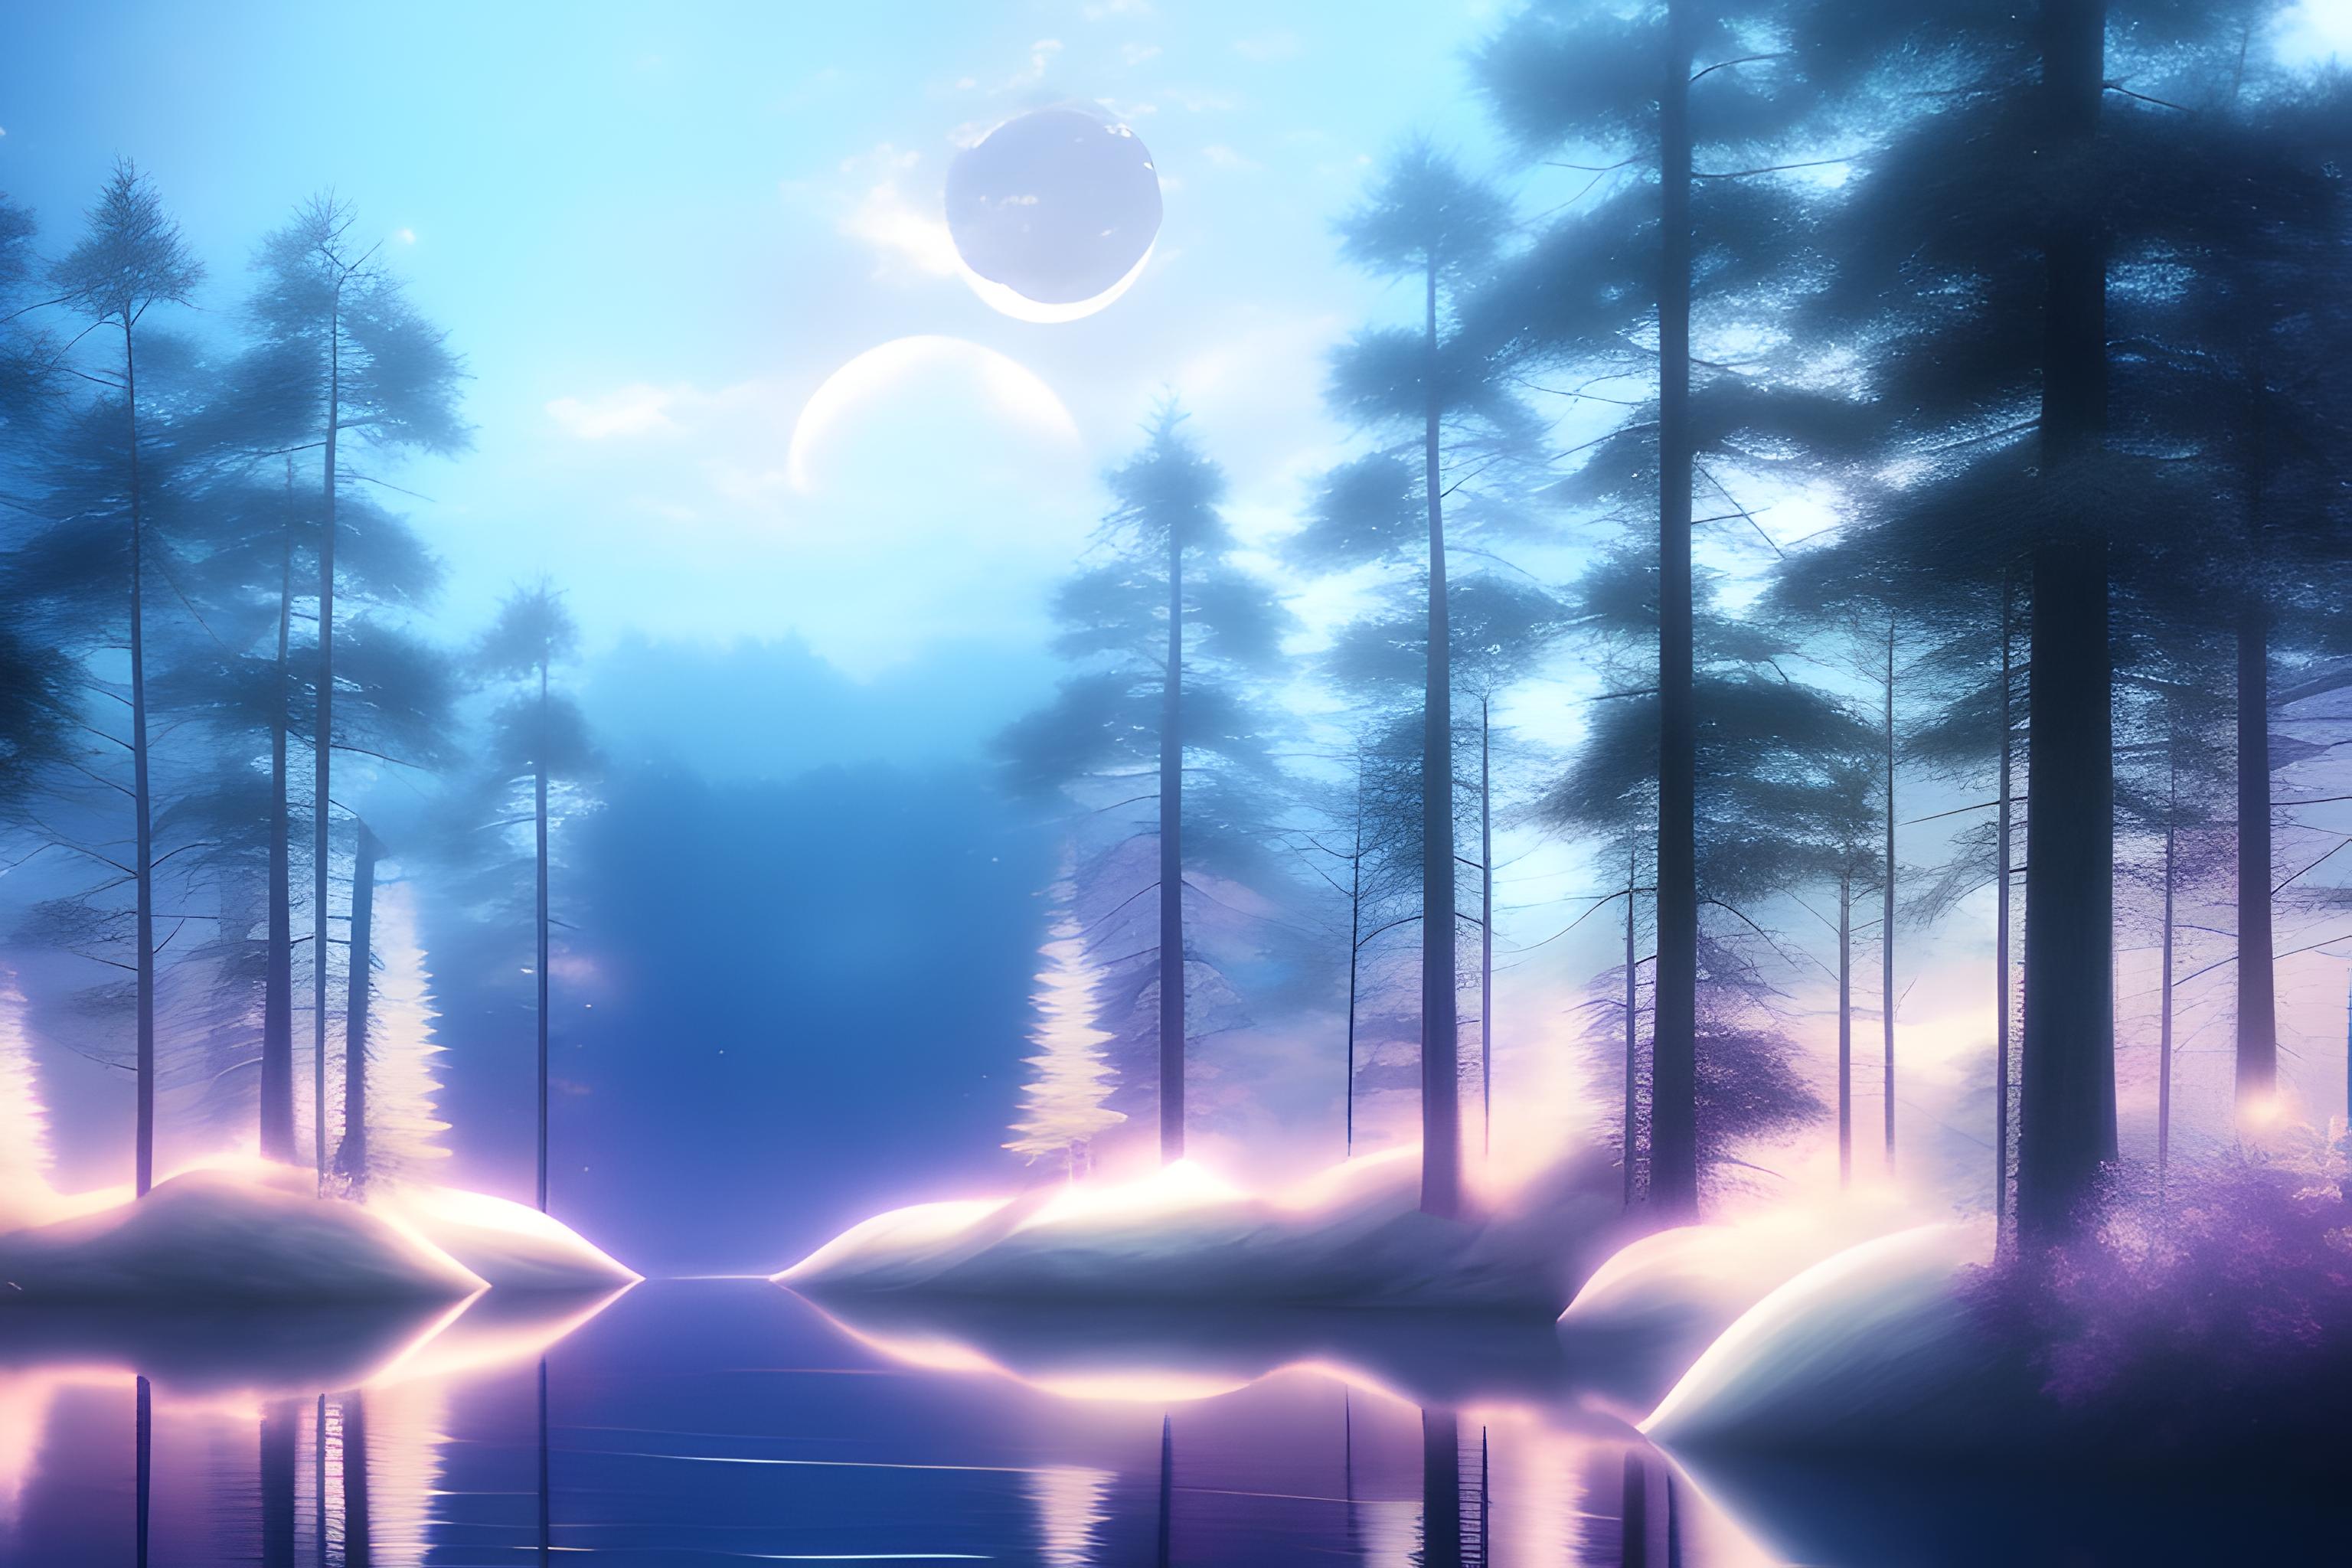 Purple Anime Forest Aesthetic Gif - Gif Abyss